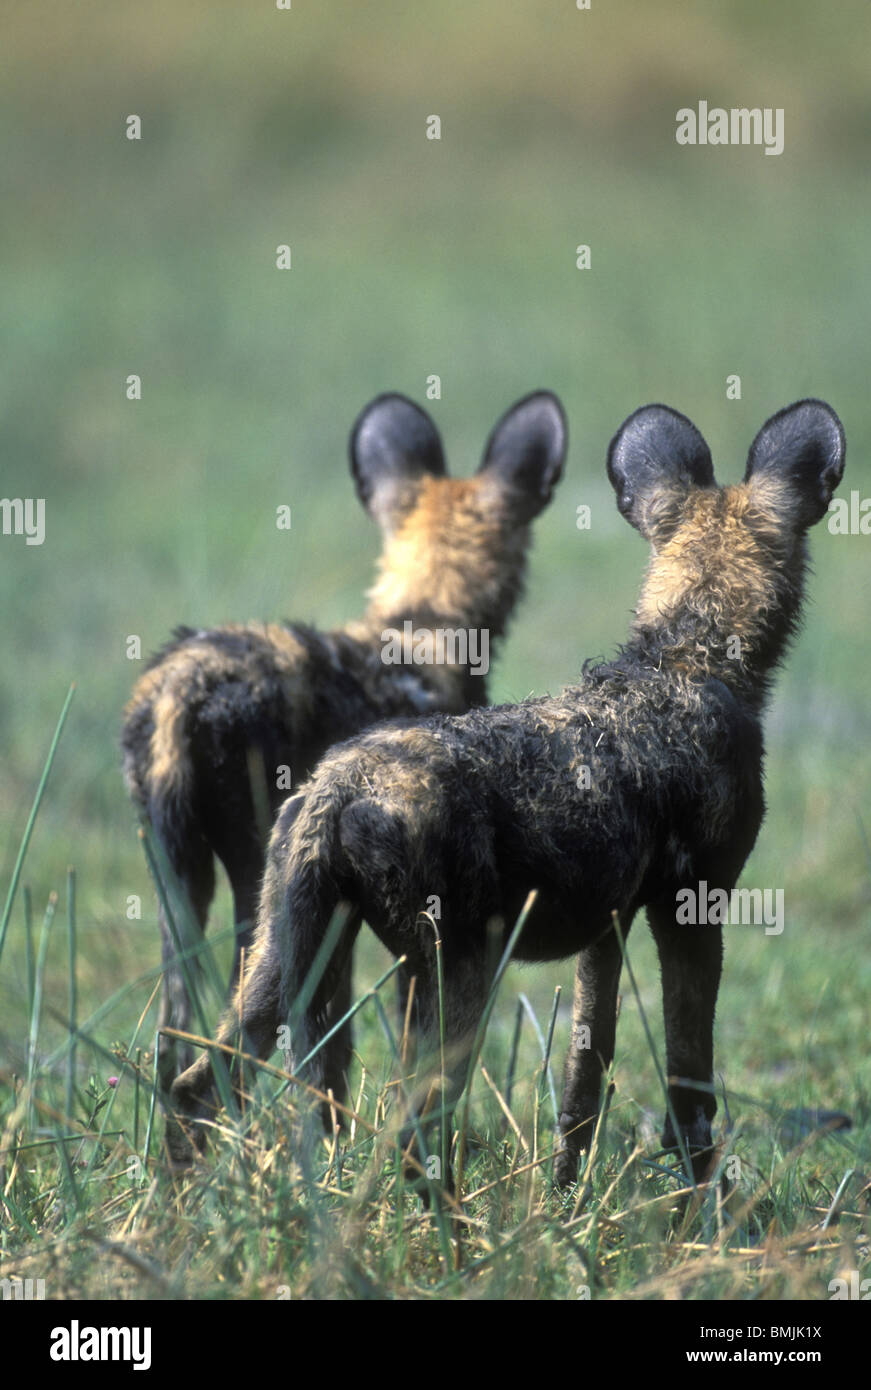 Botswana, Moremi Game Reserve, African Wild Dogs (Lycaon pictus) stand alertly in grass along Khwai River Stock Photo